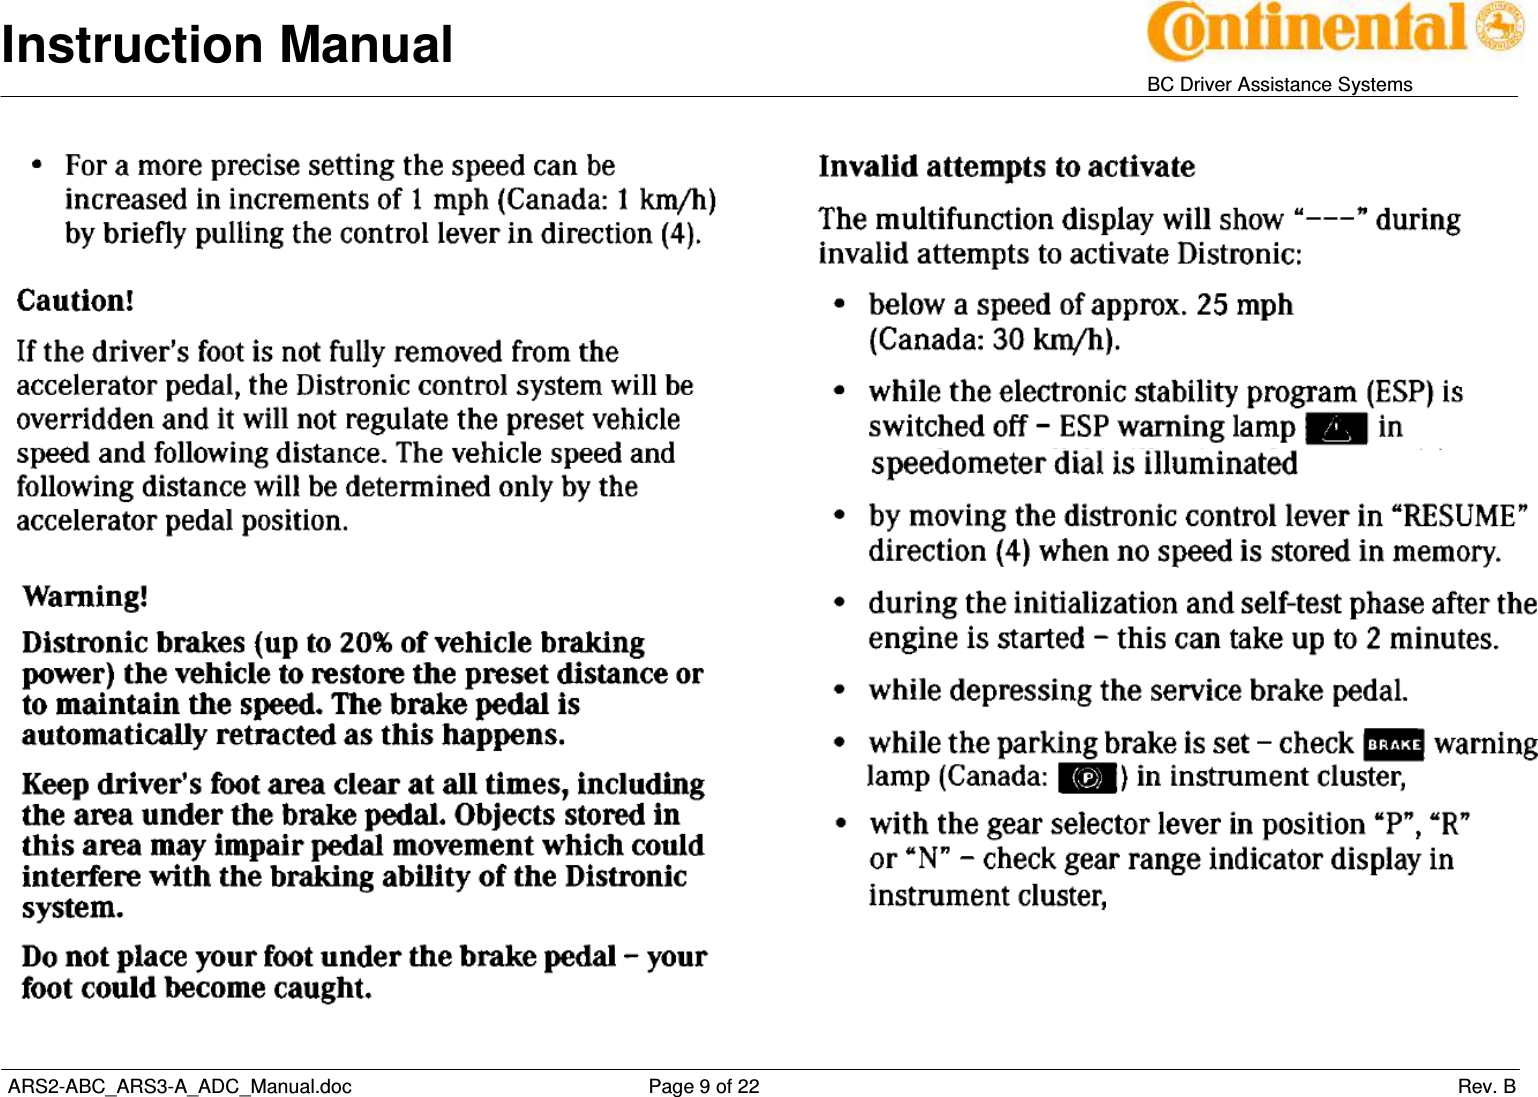 Instruction Manual   BC Driver Assistance Systems  ARS2-ABC_ARS3-A_ADC_Manual.doc     Page 9 of 22                 Rev. B        